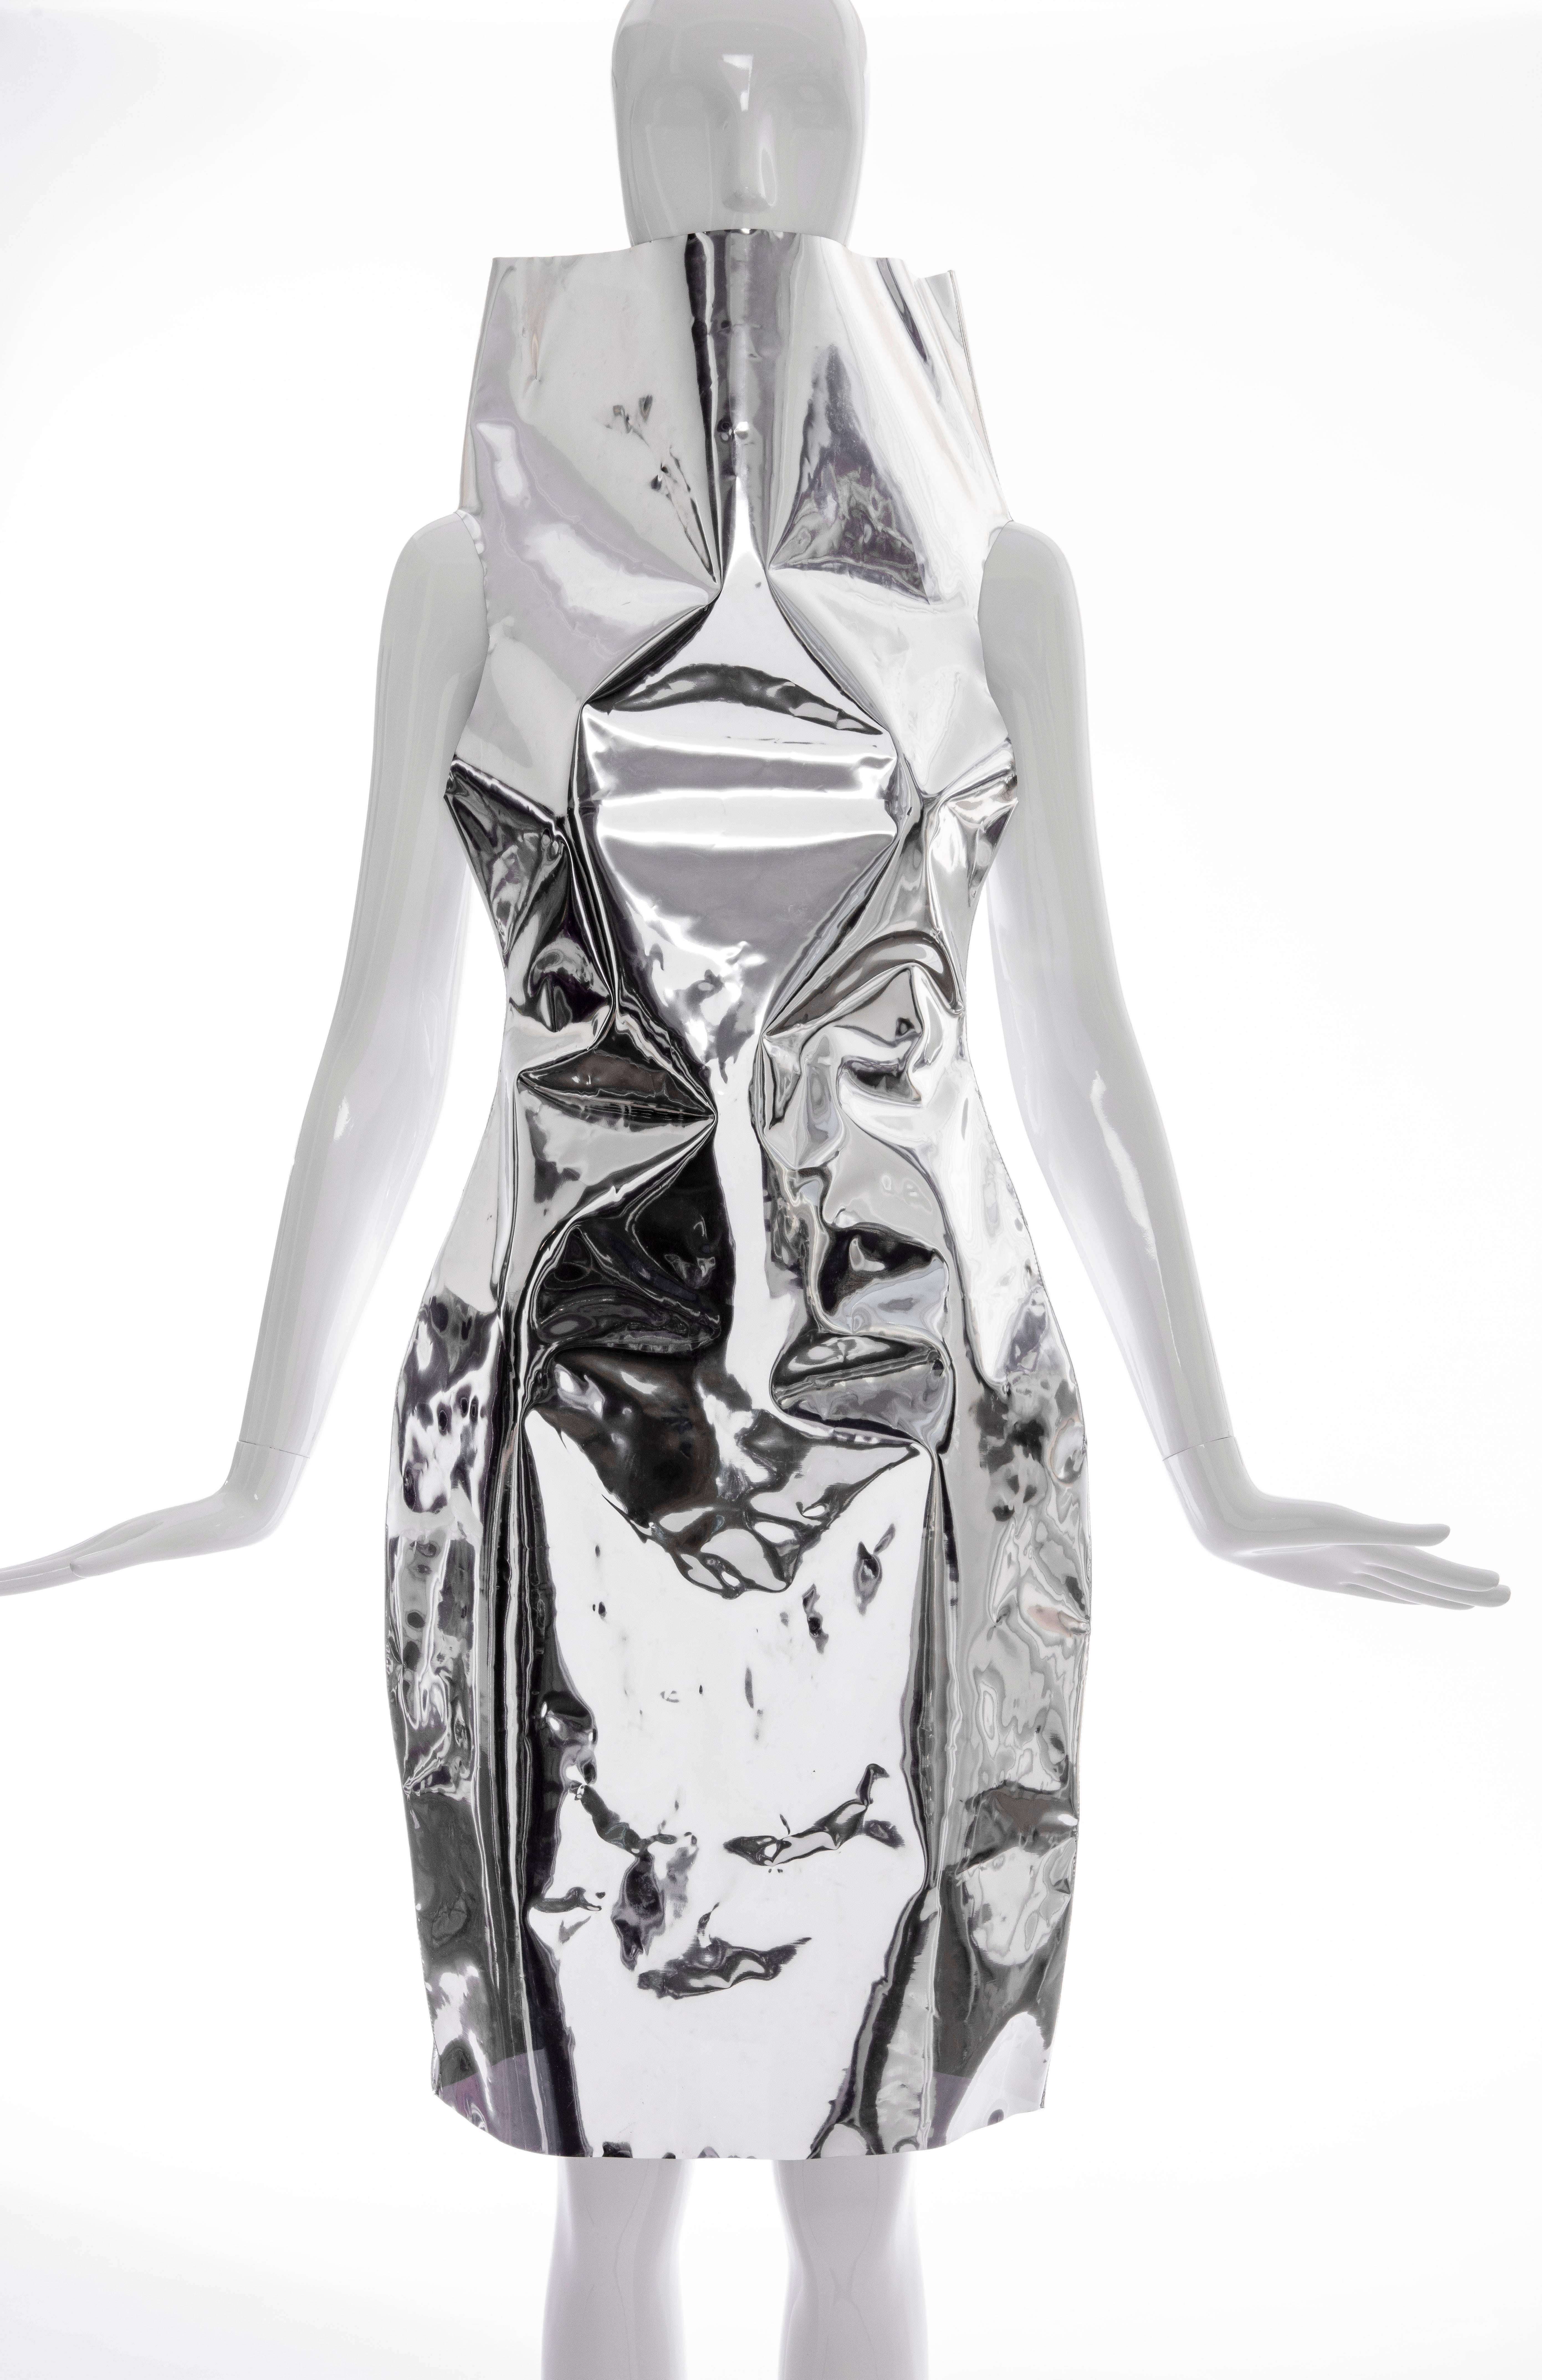 Gareth Pugh, Fall/Winter 2014, Abito sleeveless snood dress with tonal stitching, high funnel neckline and exposed zip closure at back.

IT.40
US.4

Bust 34”, Waist 30”, Hip 37”, Length 43”